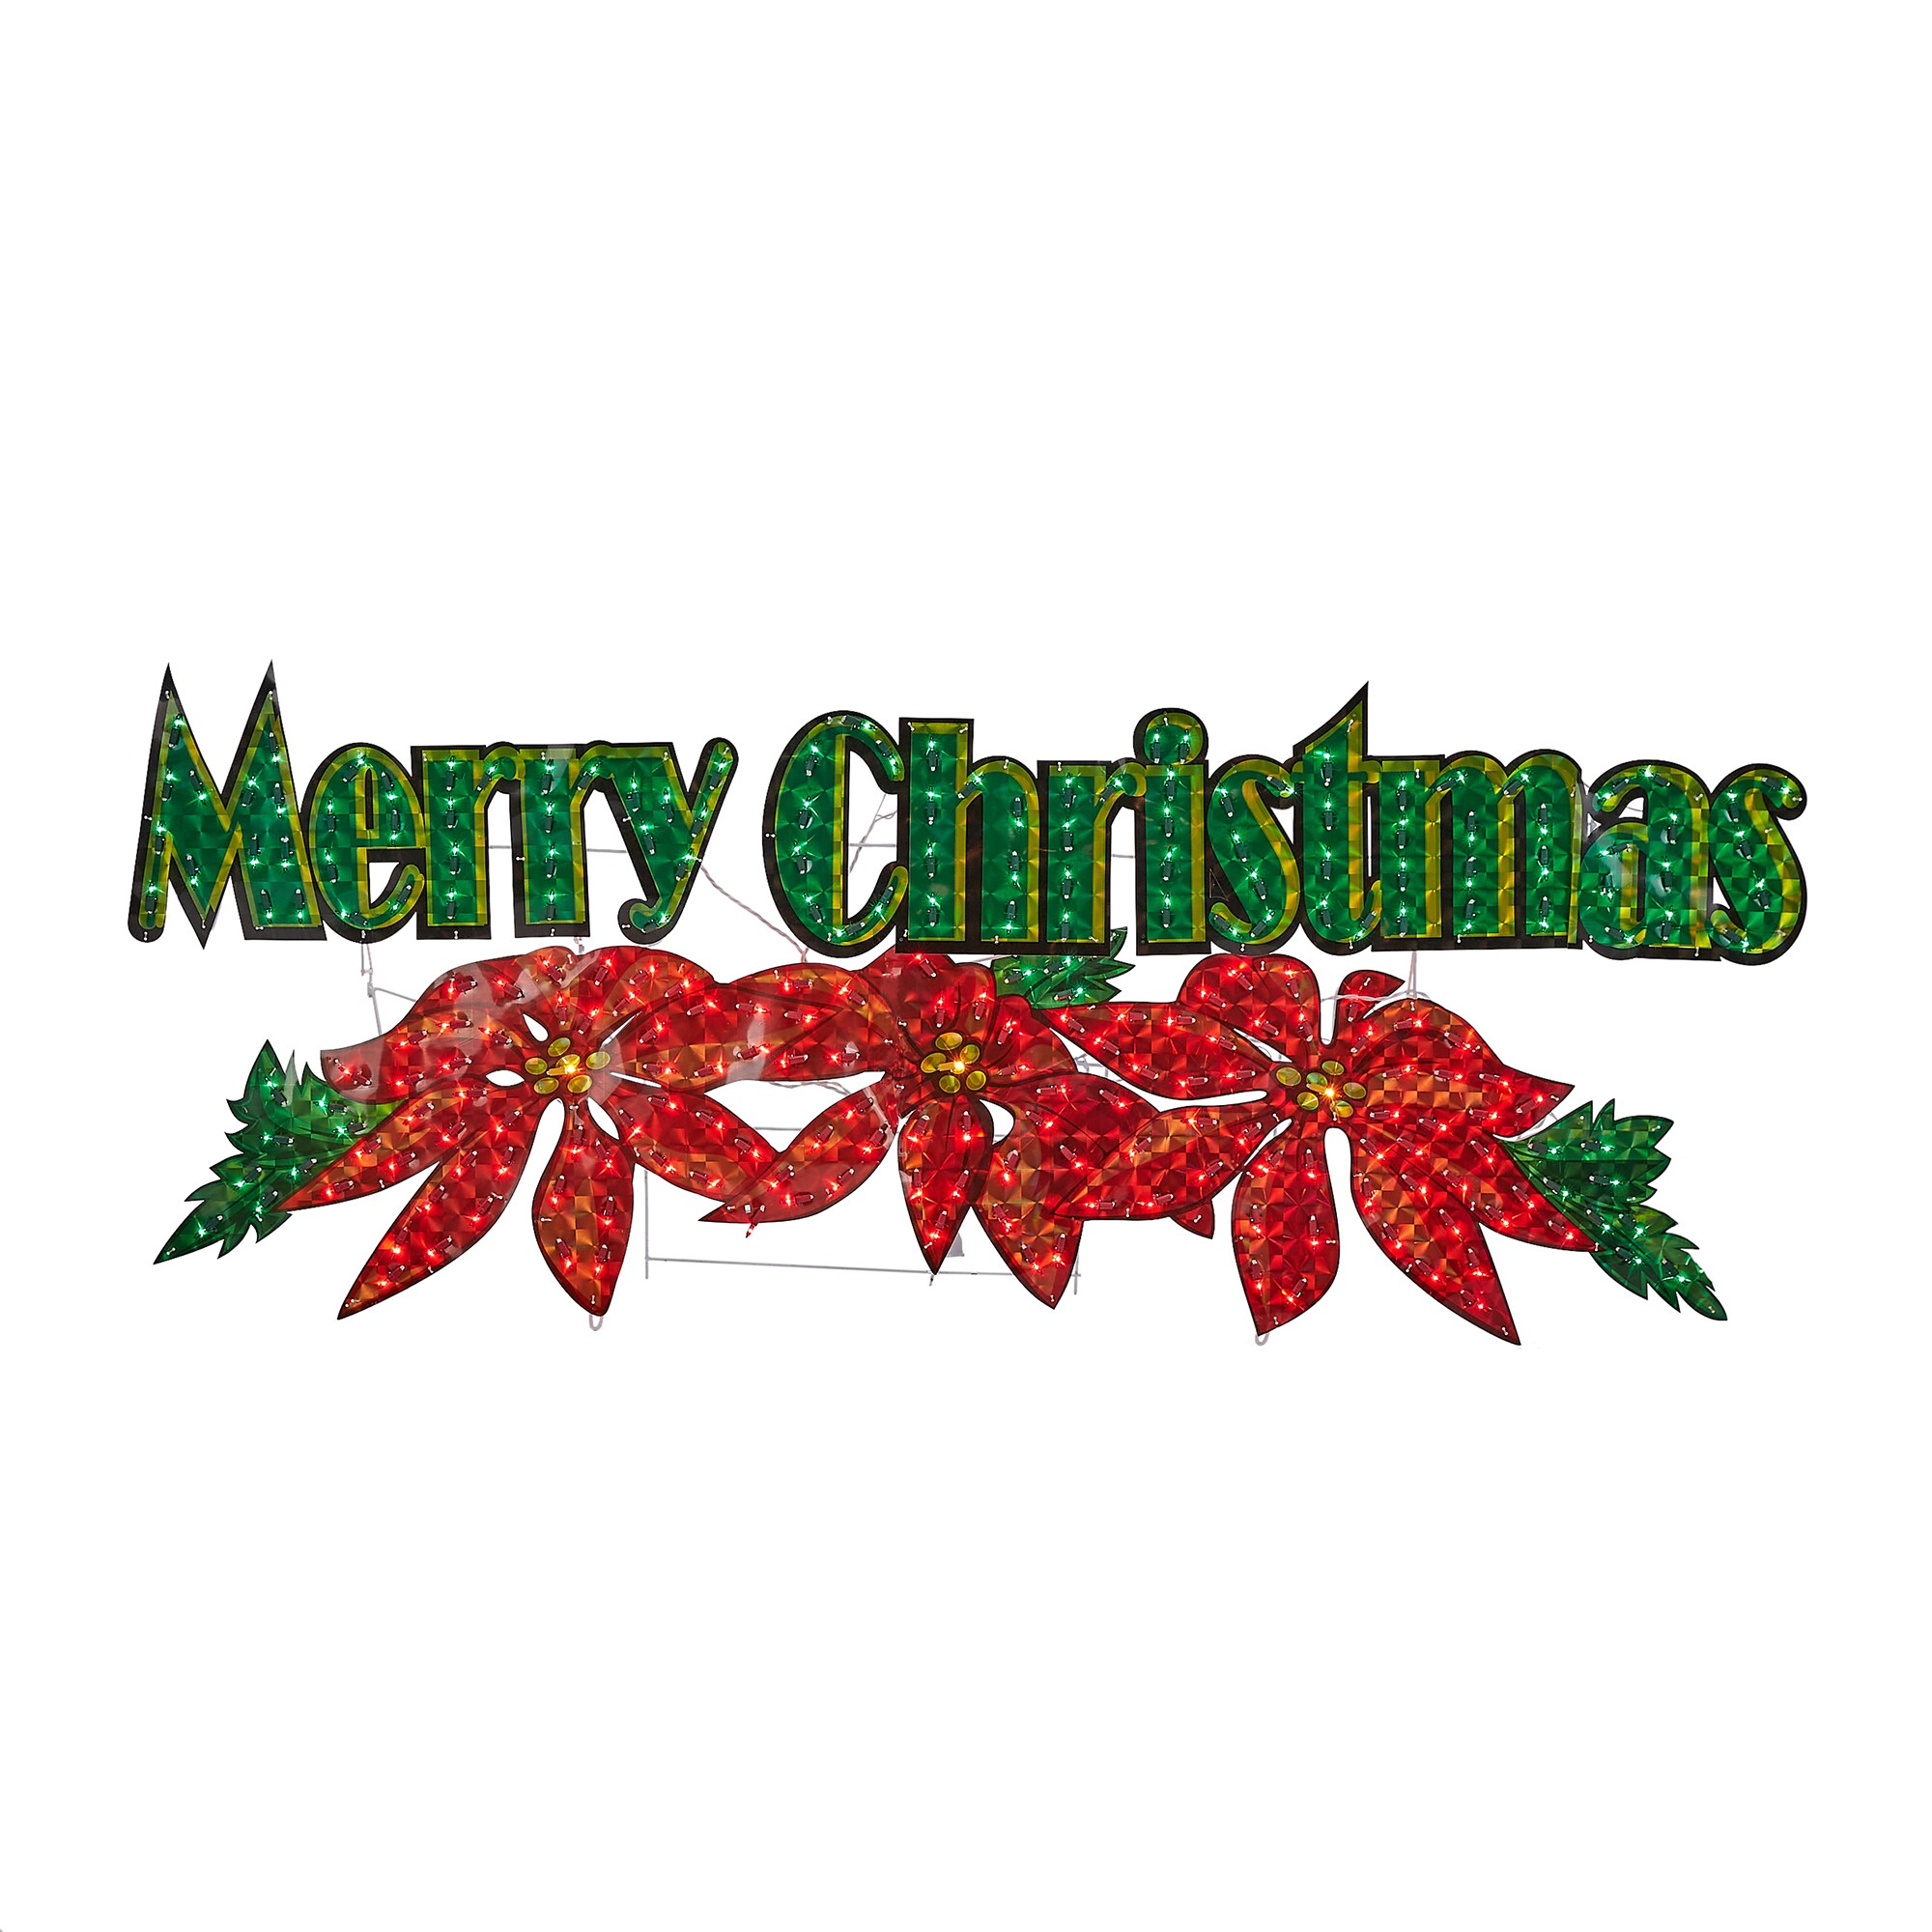 44" Holographic Prelit MERRY CHRISTMAS Sign Santa Holly Outdoor Yard Lighted NIB 